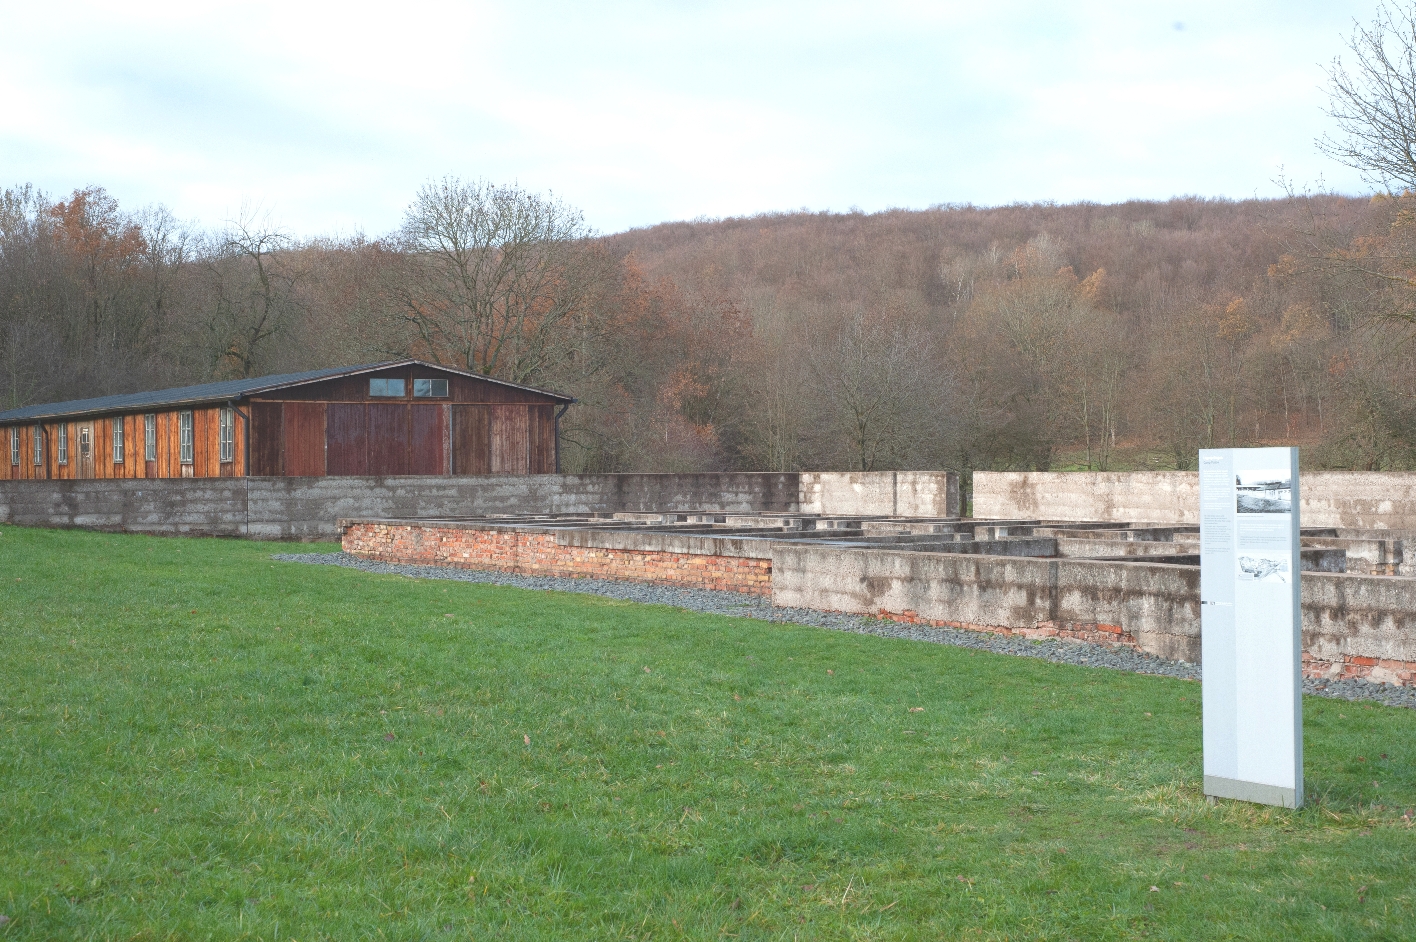 An information stele can be seen in the right foreground of the picture, which reveals that it is the location of the former camp prison. The foundation walls can be seen behind it. The carpentry barracks can be seen in the background.